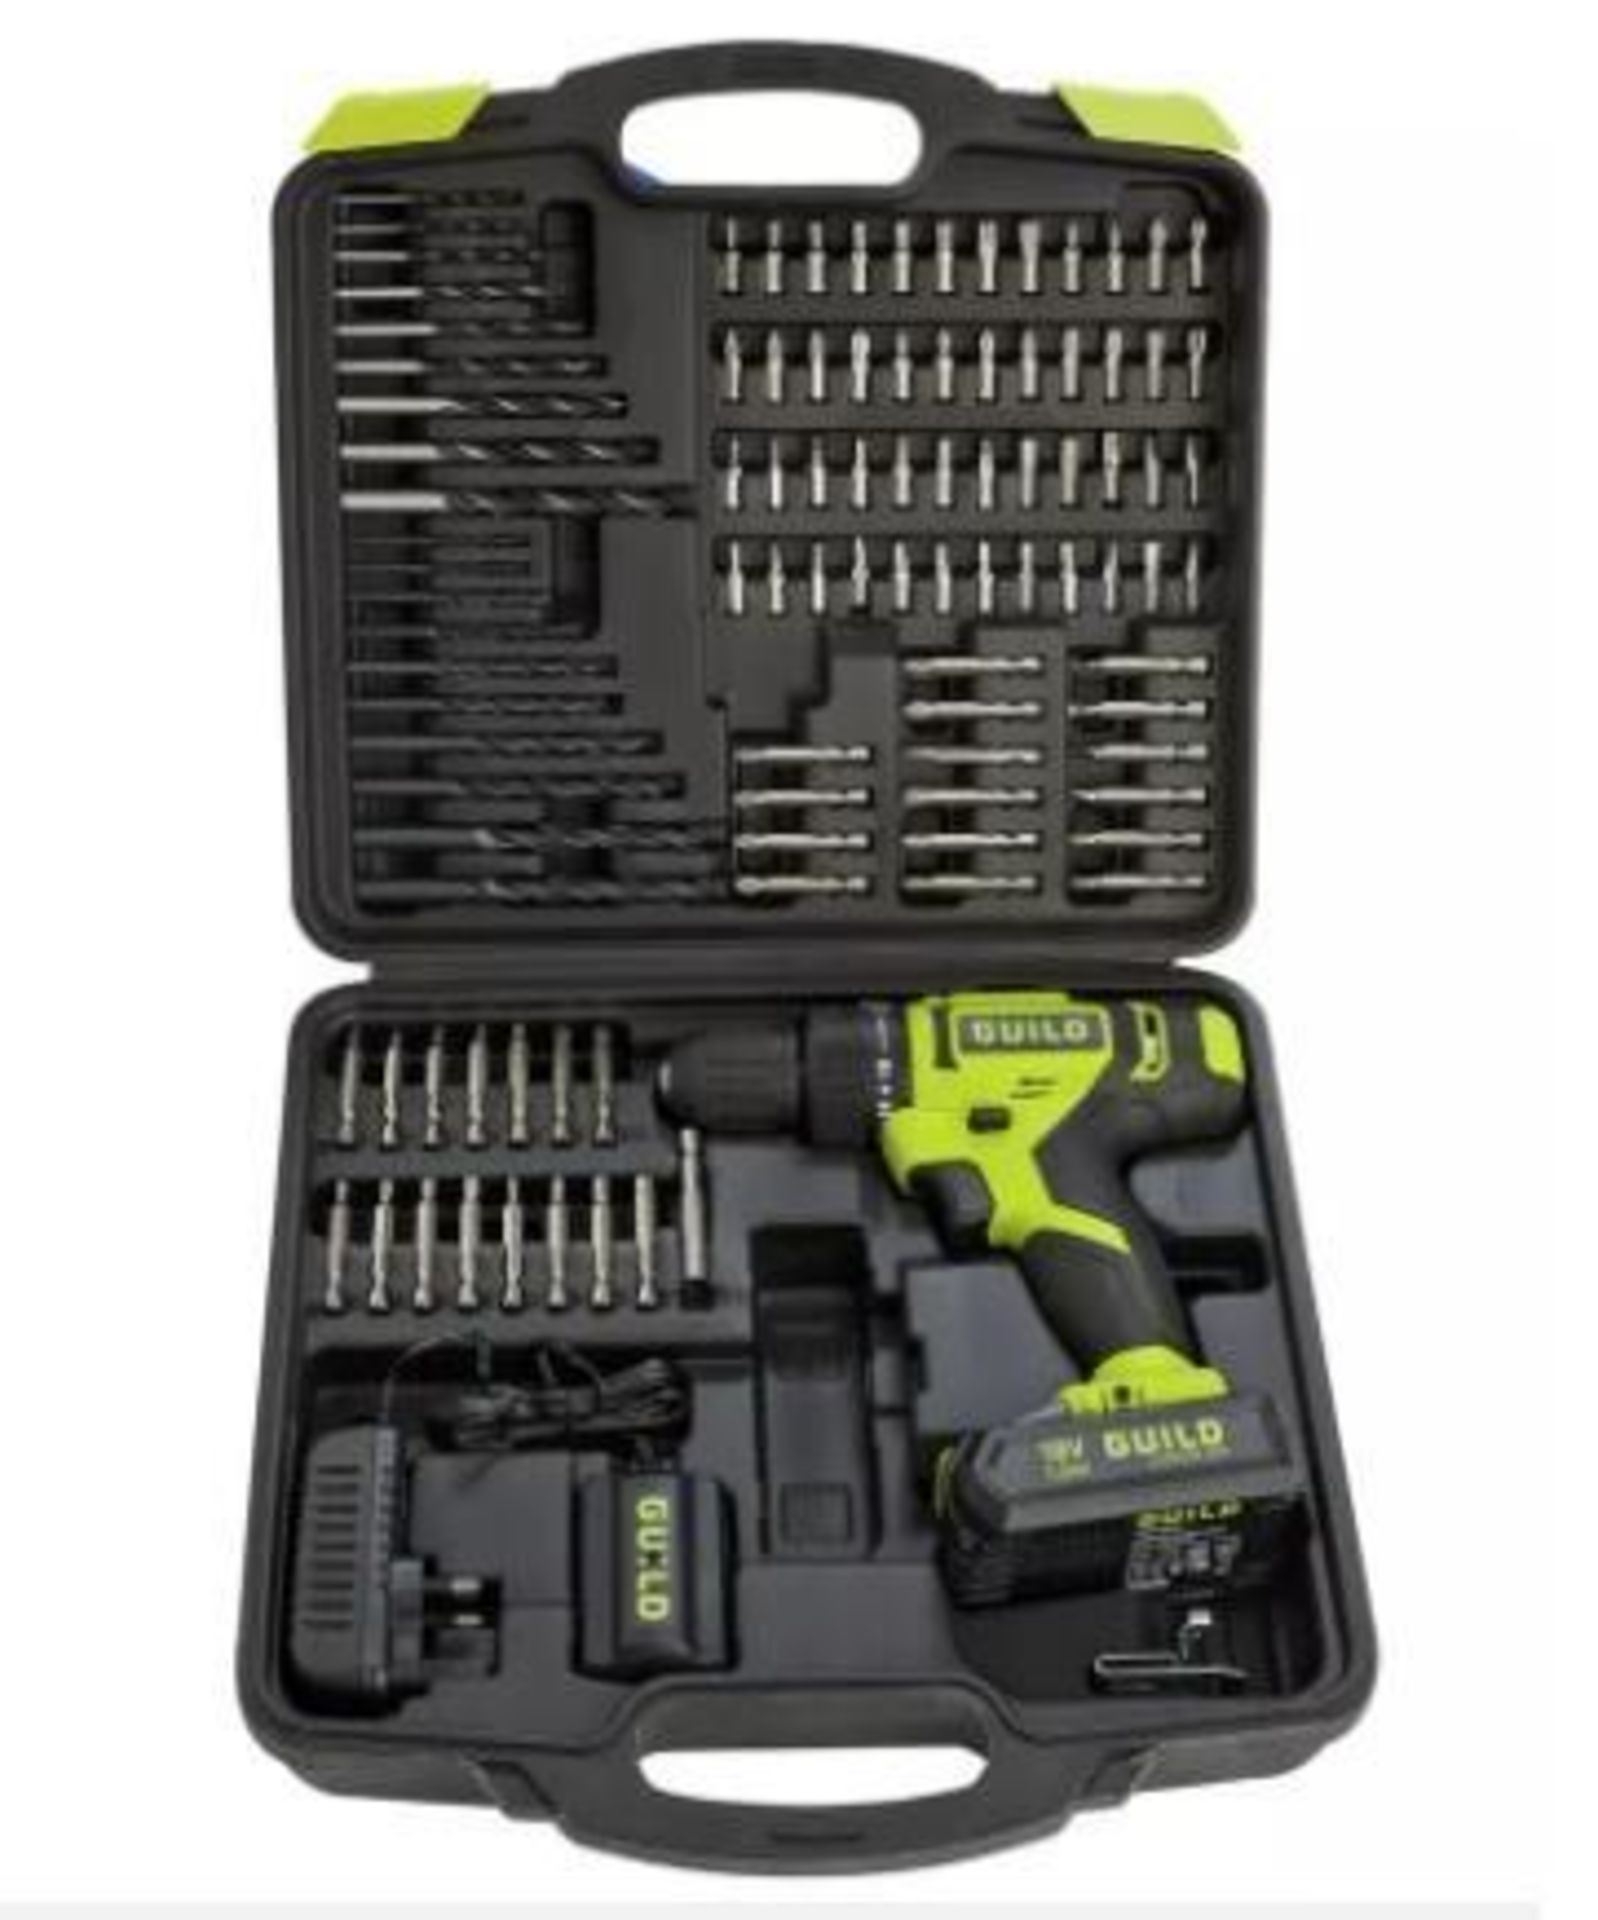 Guild 1.5Ah Cordless Combi Drill with 100 Accessories - 18V - £50.00 RRP